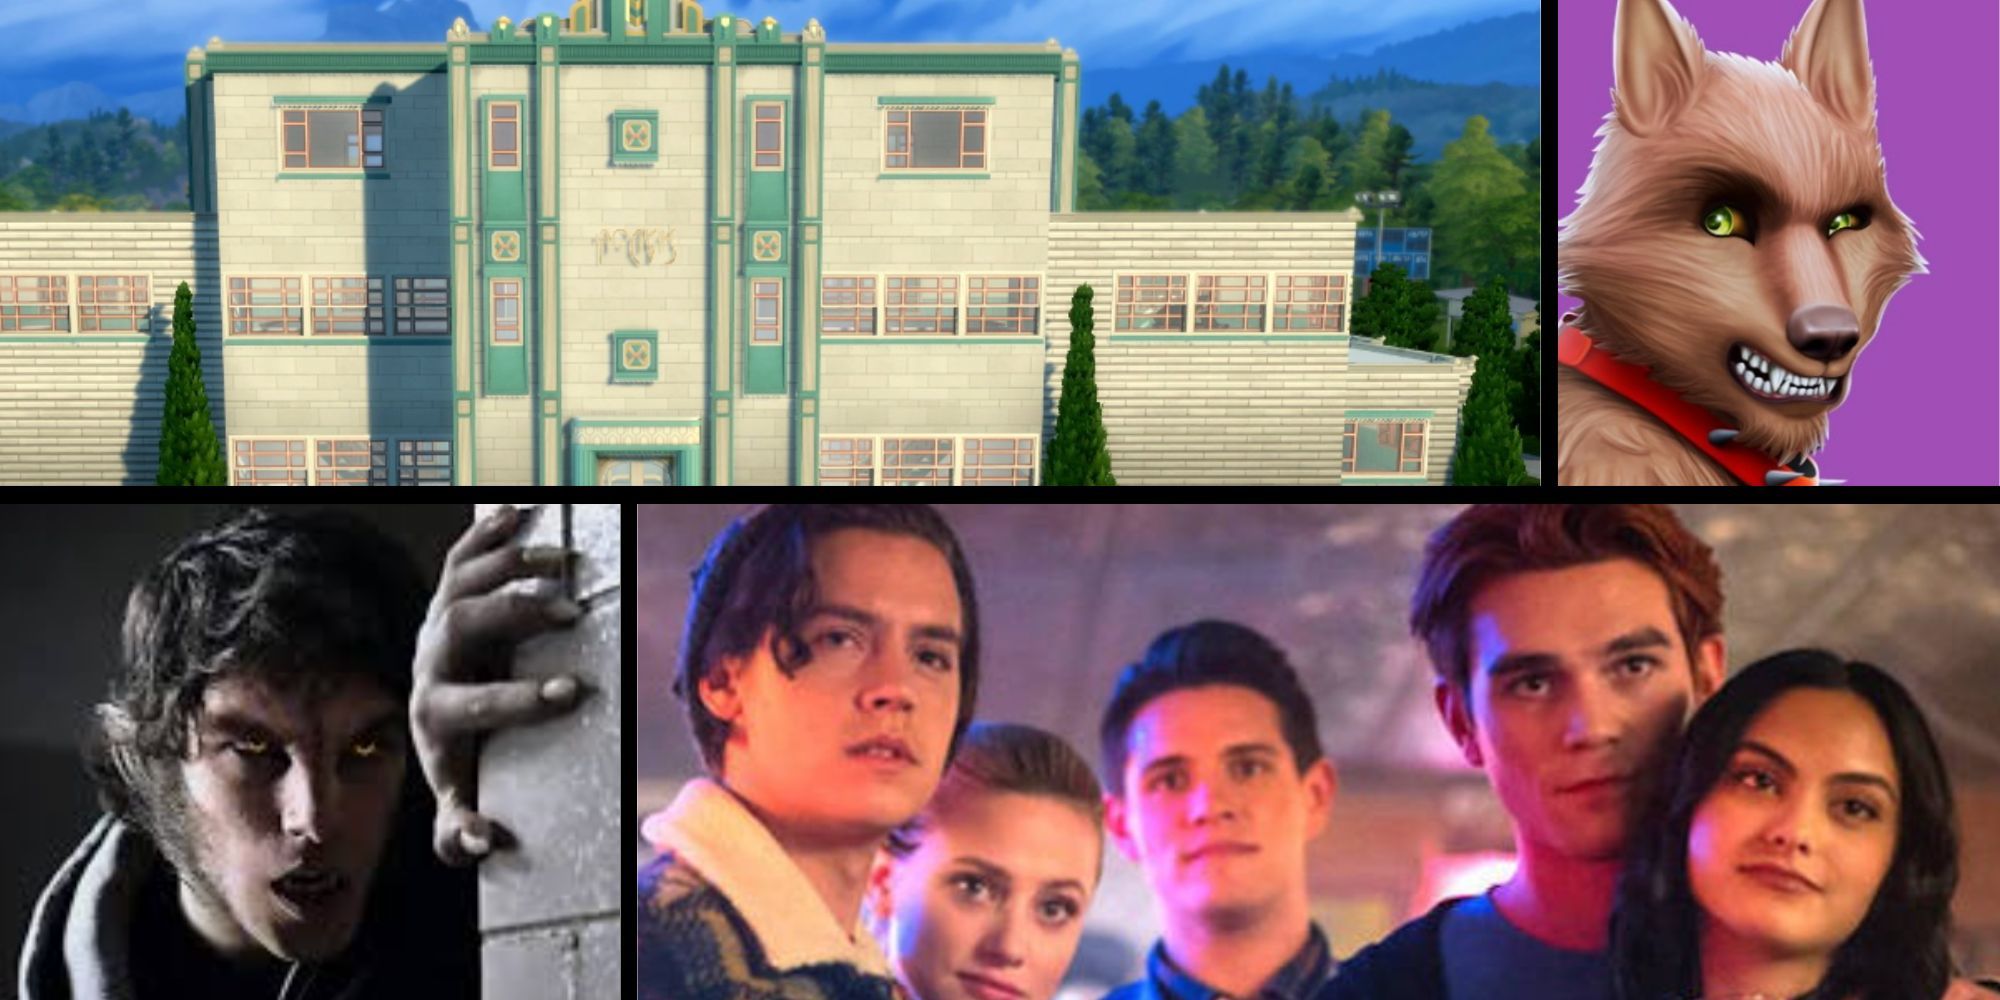 The Sims 4 - High School Years Copperdale High School, Sims Teen Wolf, Teen Wolf TV Show, and Cast of Riverdale